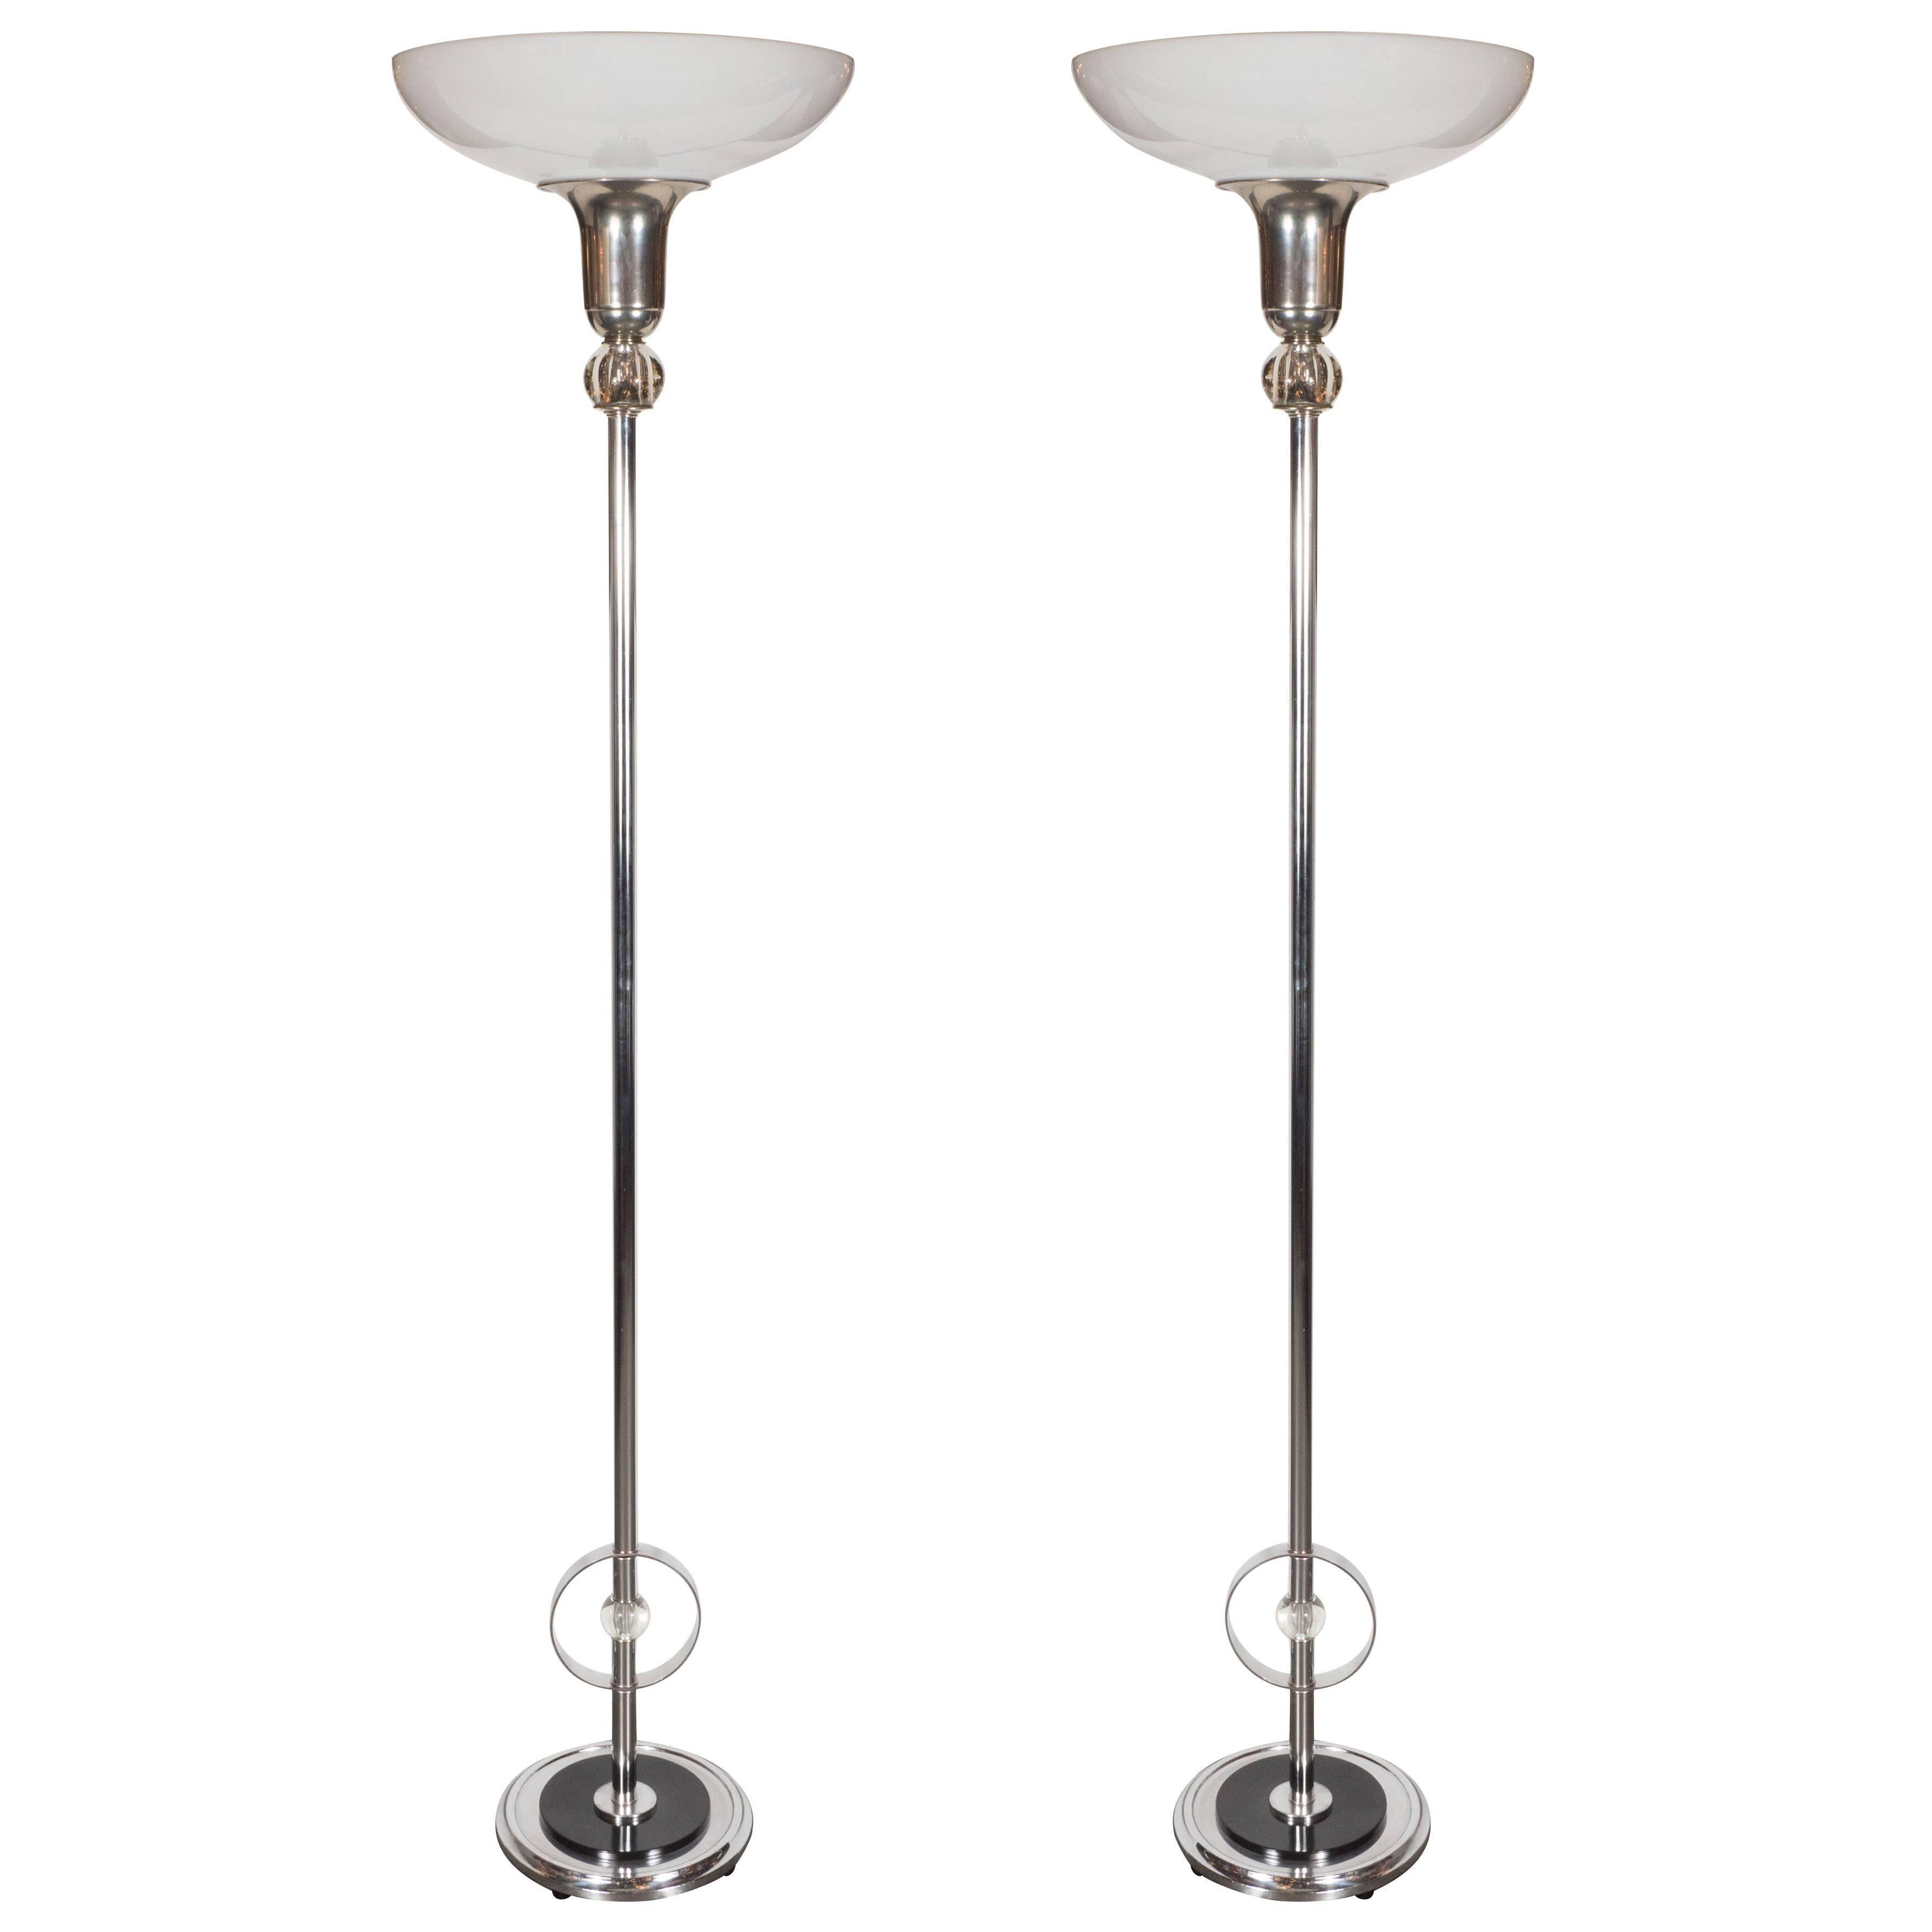 Pair of Art Deco Machine Age Floor Lamps in Chrome, Glass and Black Enamel